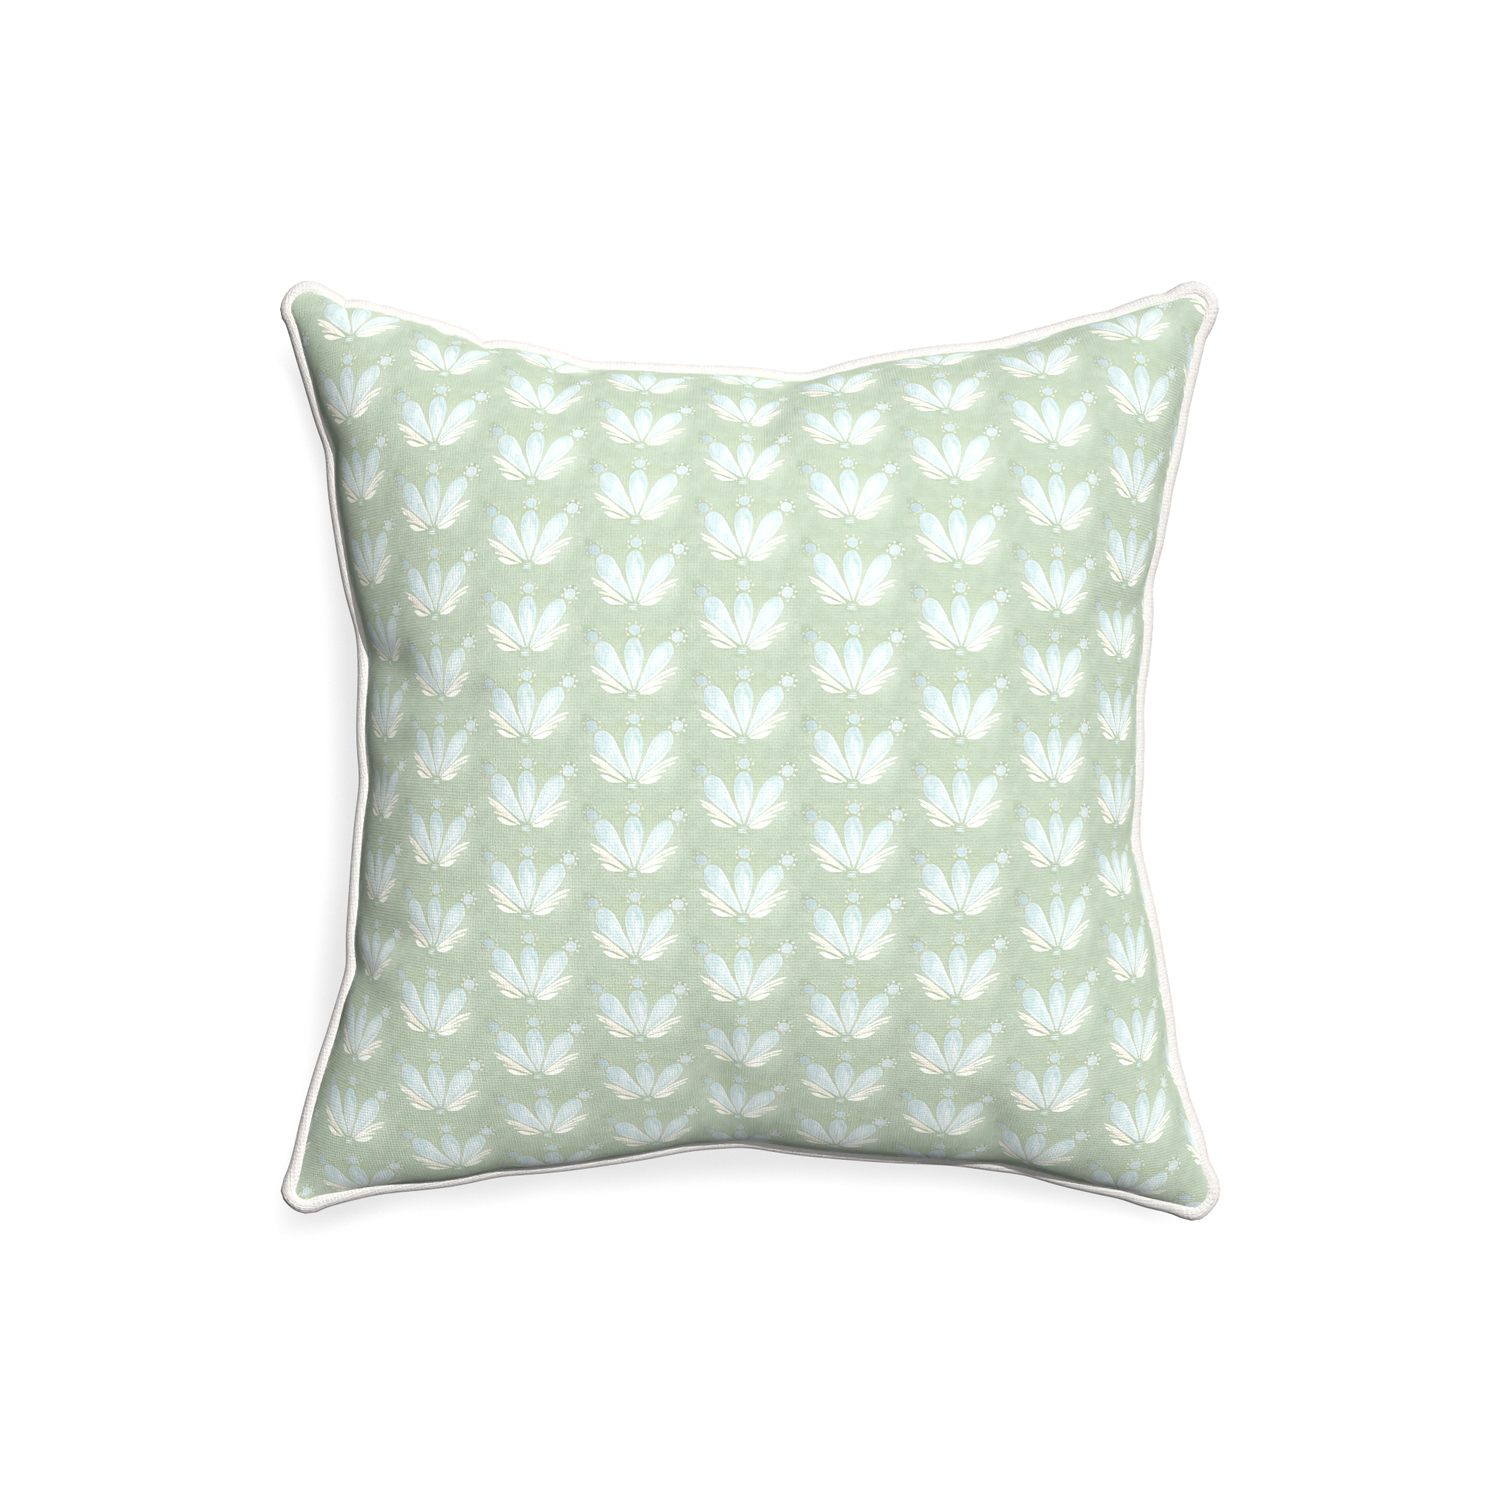 20-square serena sea salt custom blue & green floral drop repeatpillow with snow piping on white background